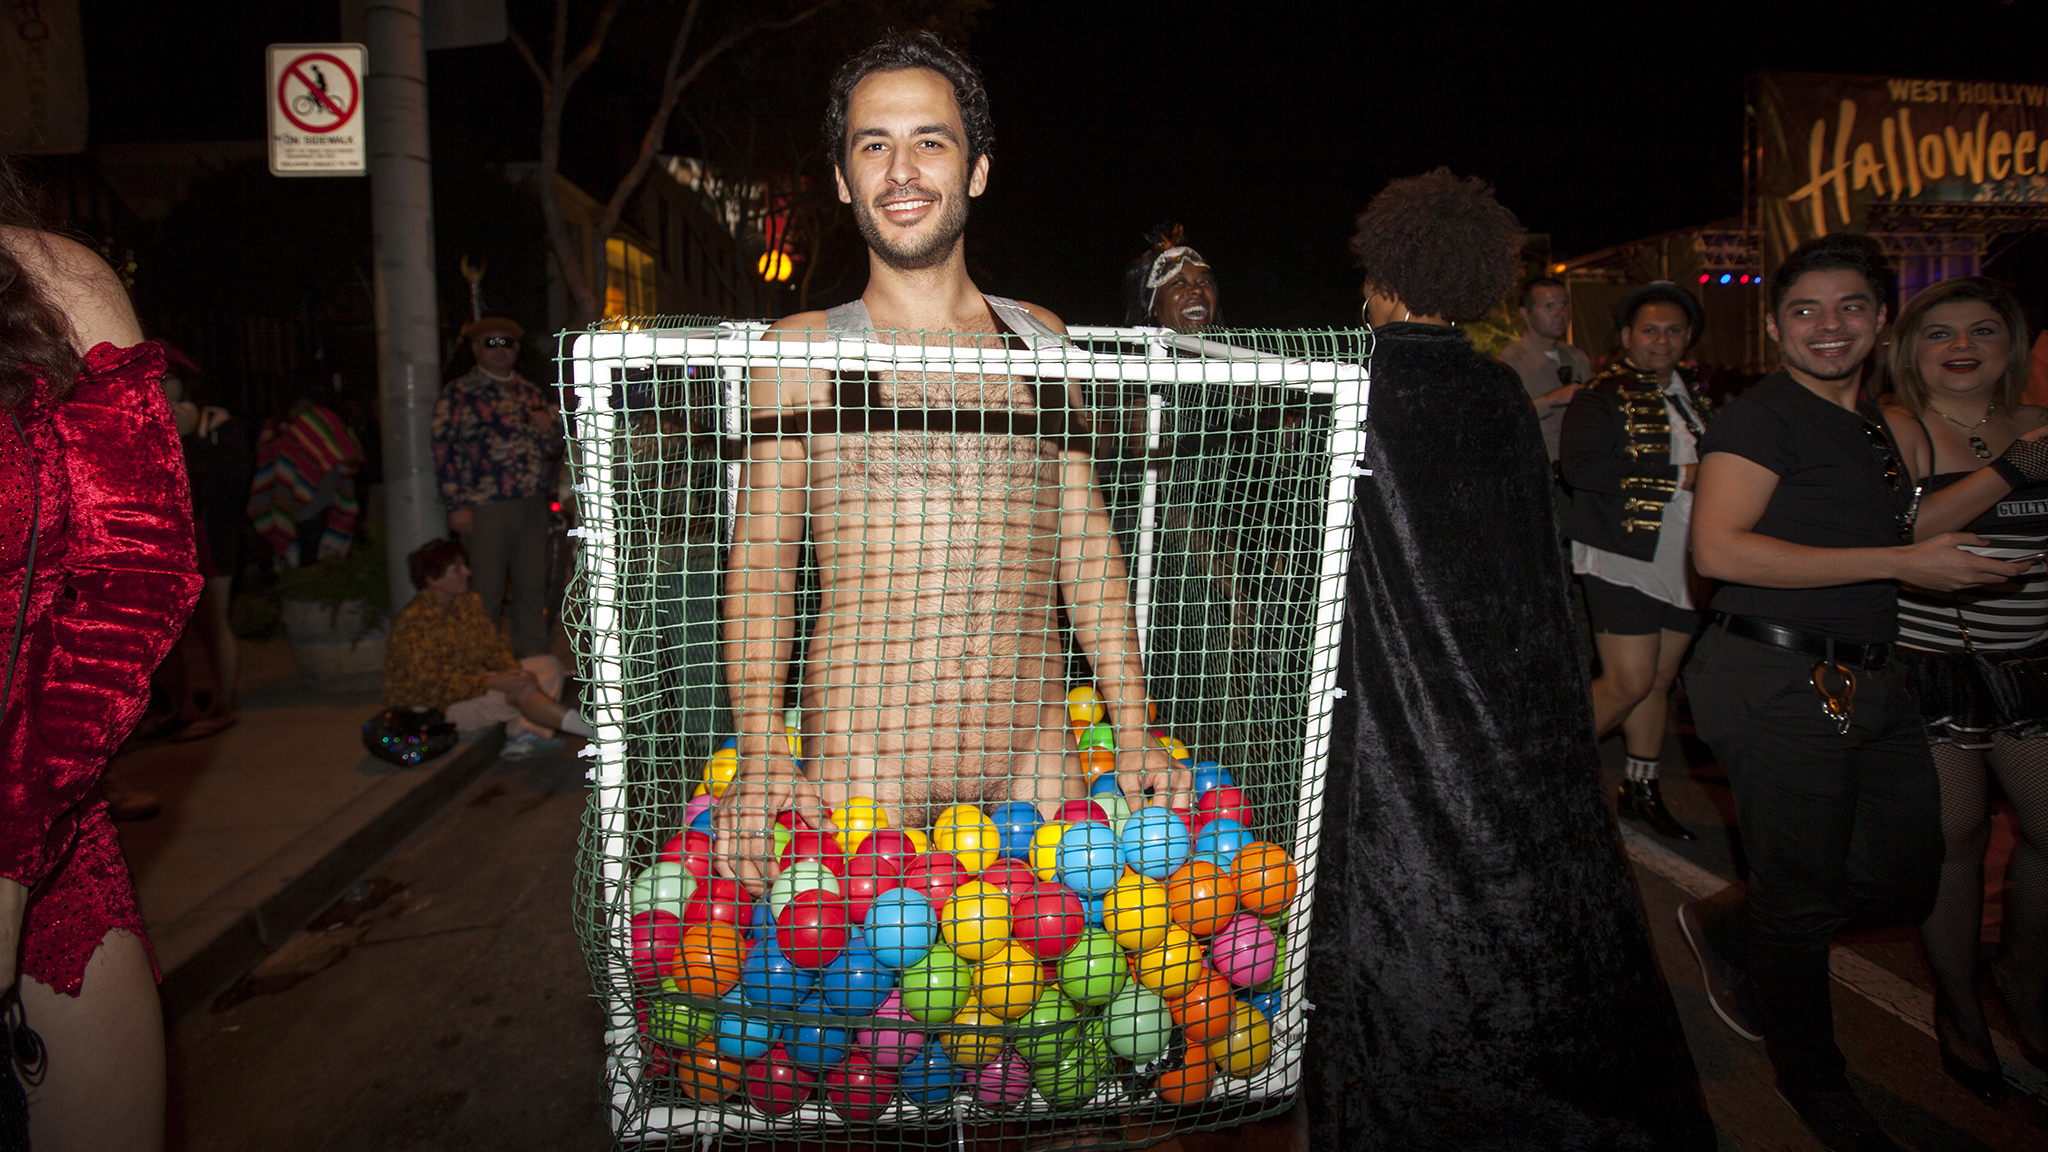 West Hollywood Halloween Costume Carnival 2015 in photos